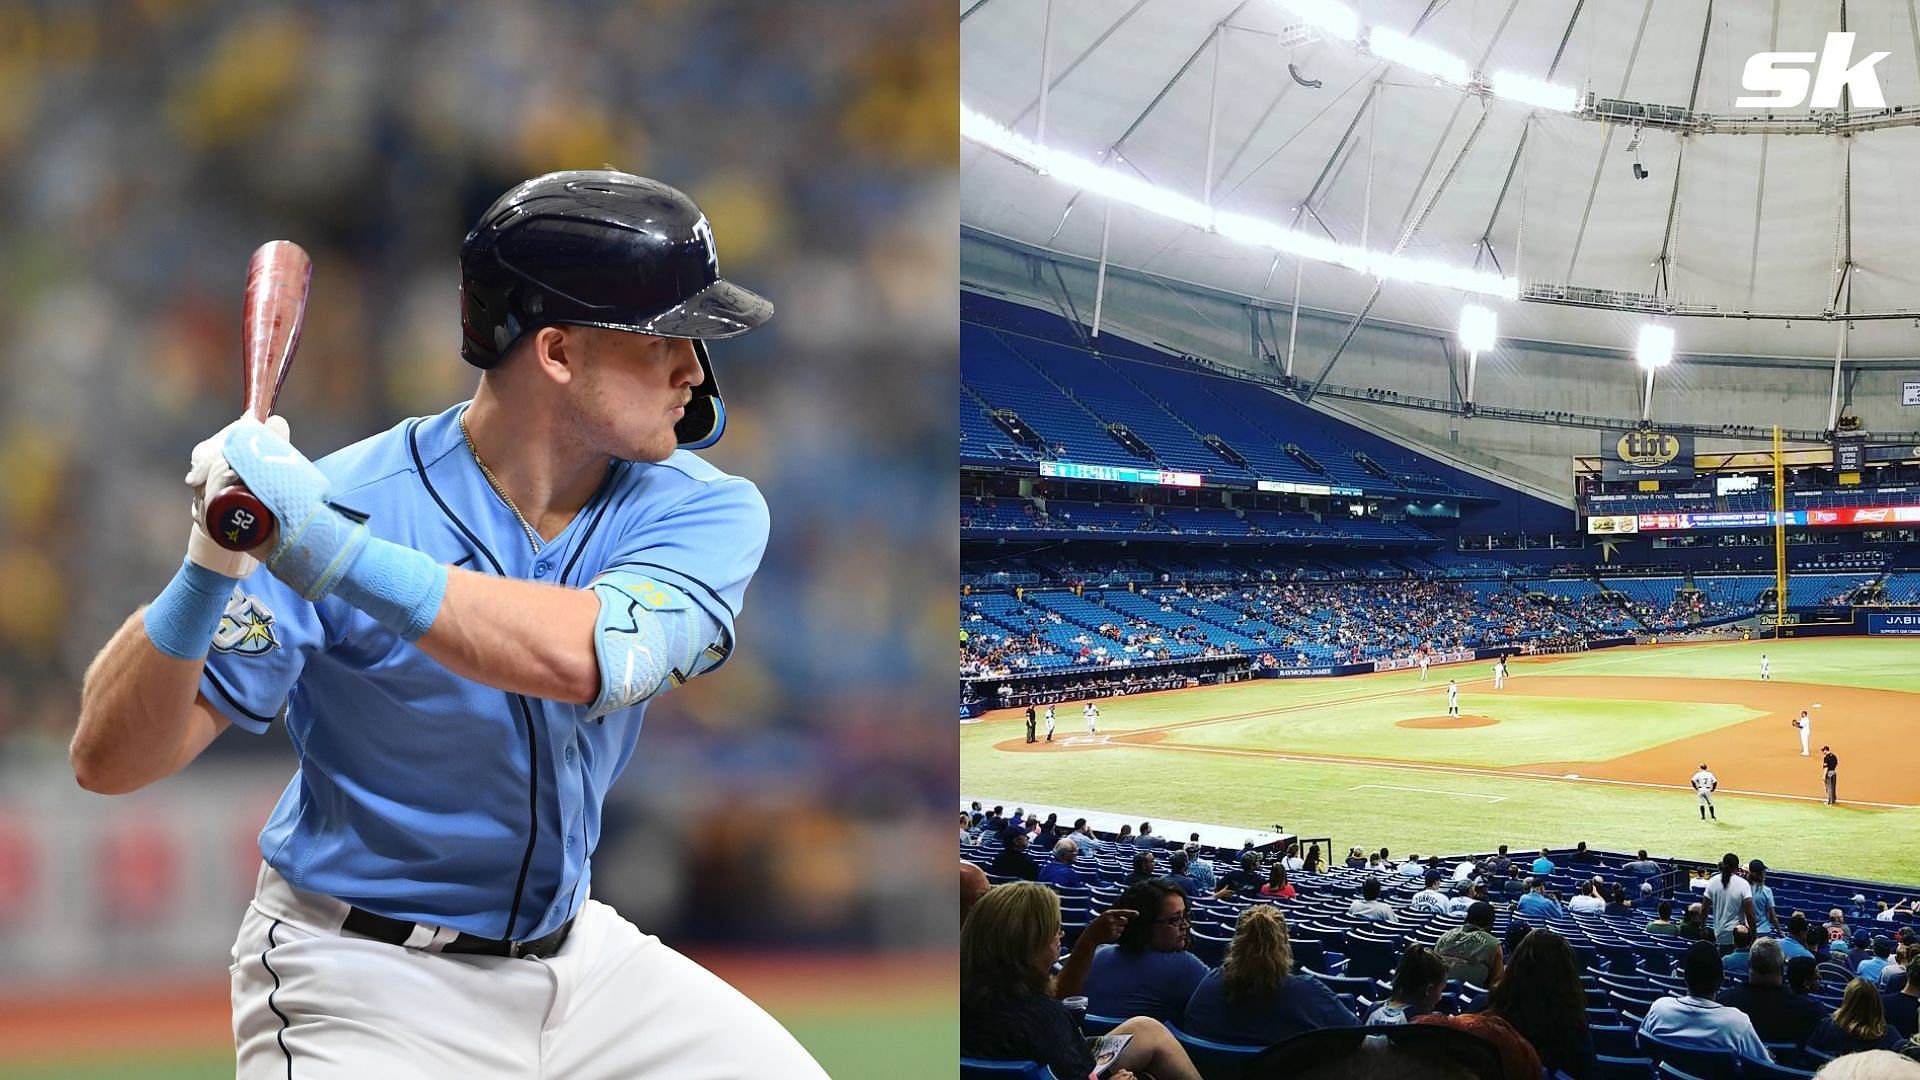 The Tampa Bay Rays struggled to draw fans to their playoff display